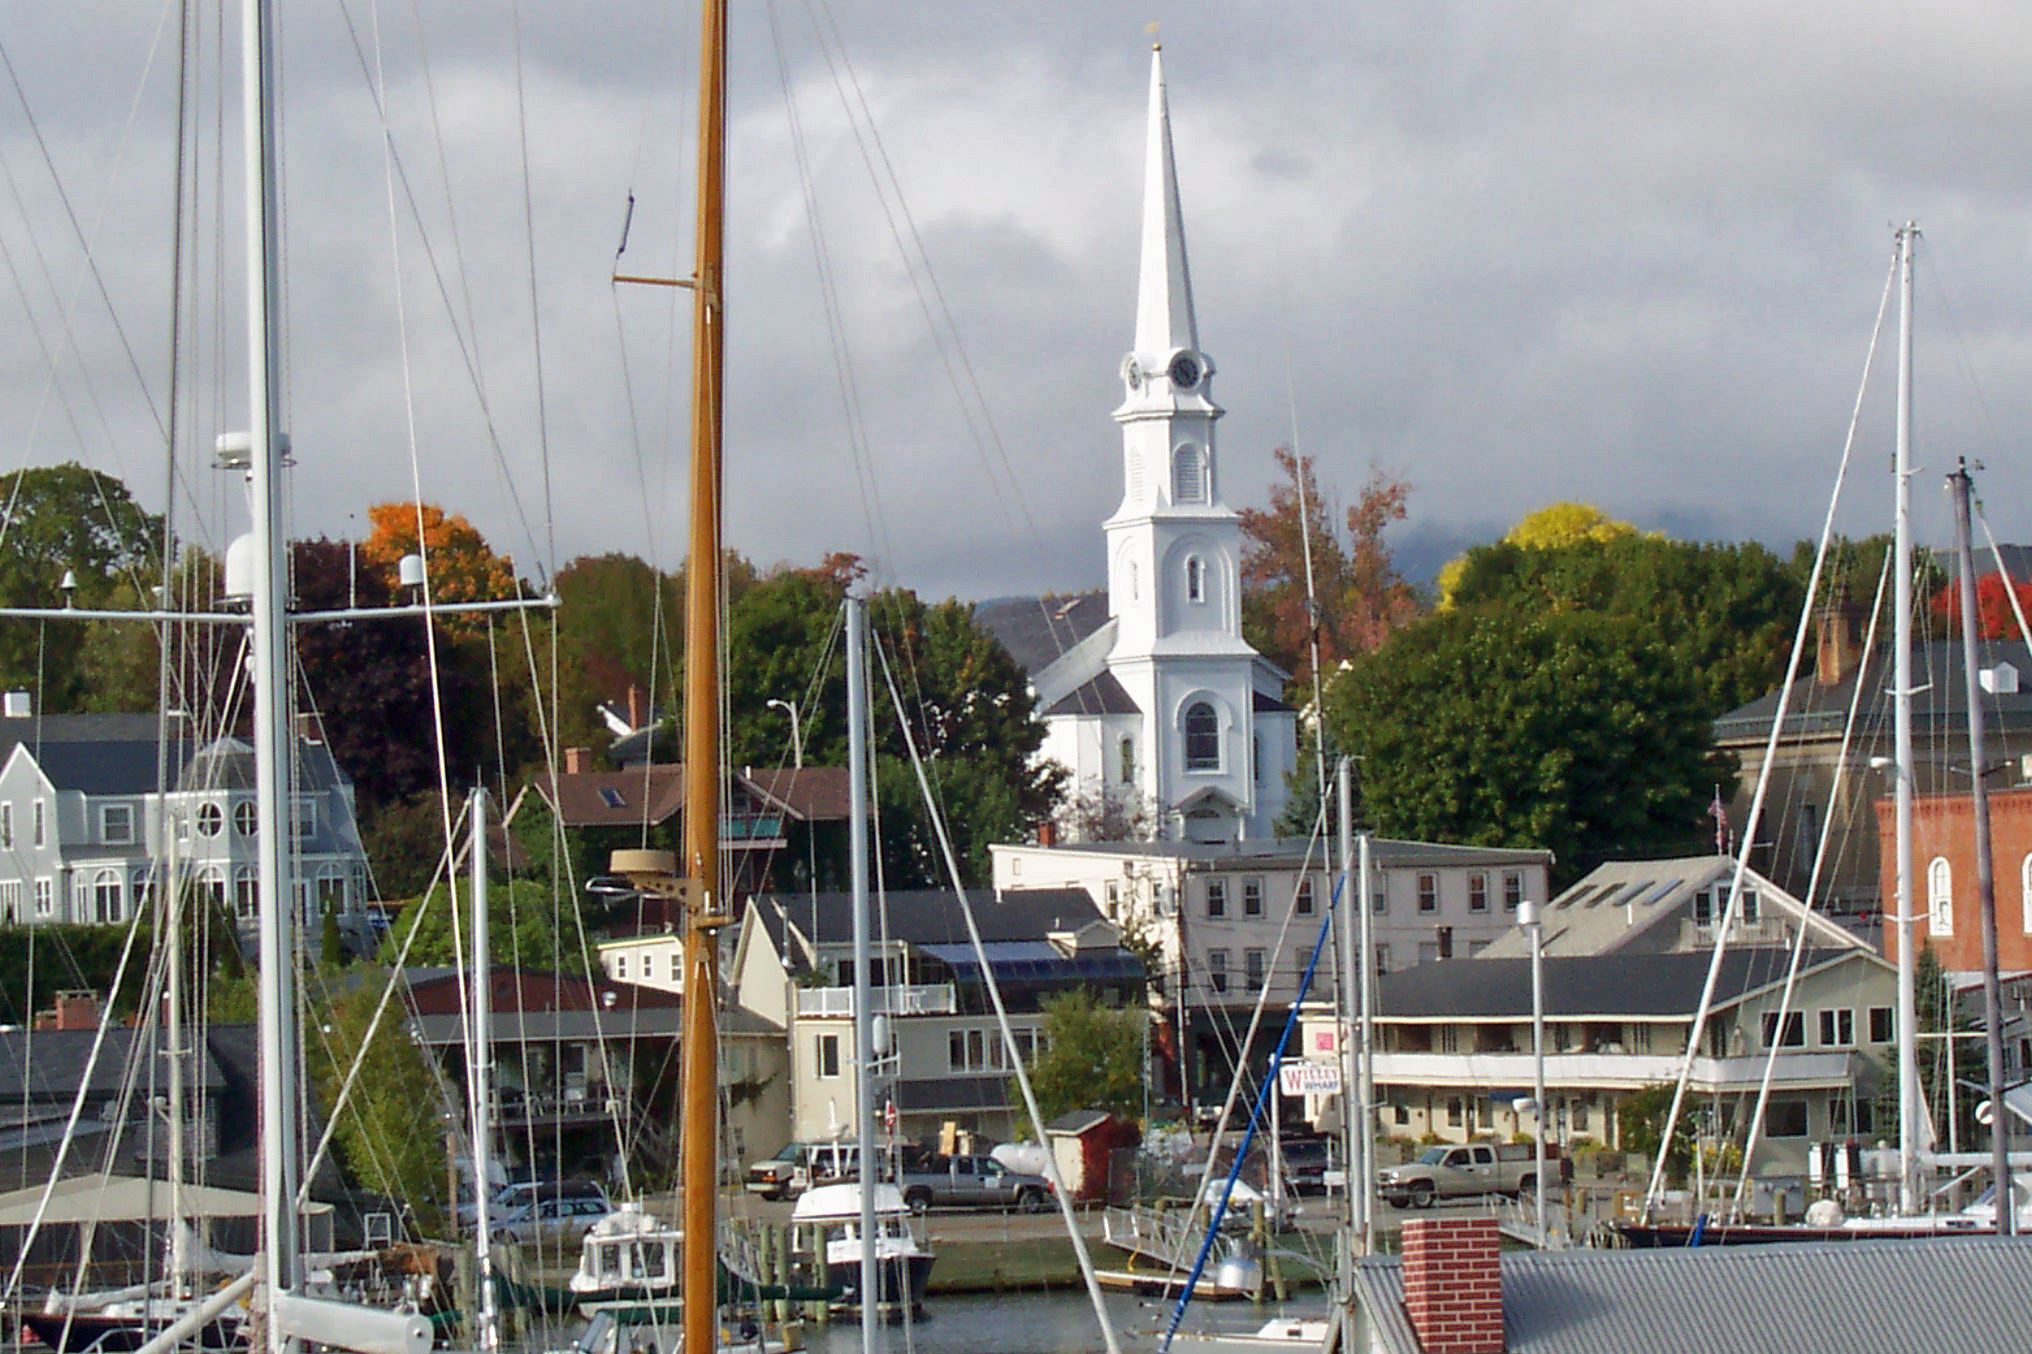 A Steeple Among The Masts (user submitted)